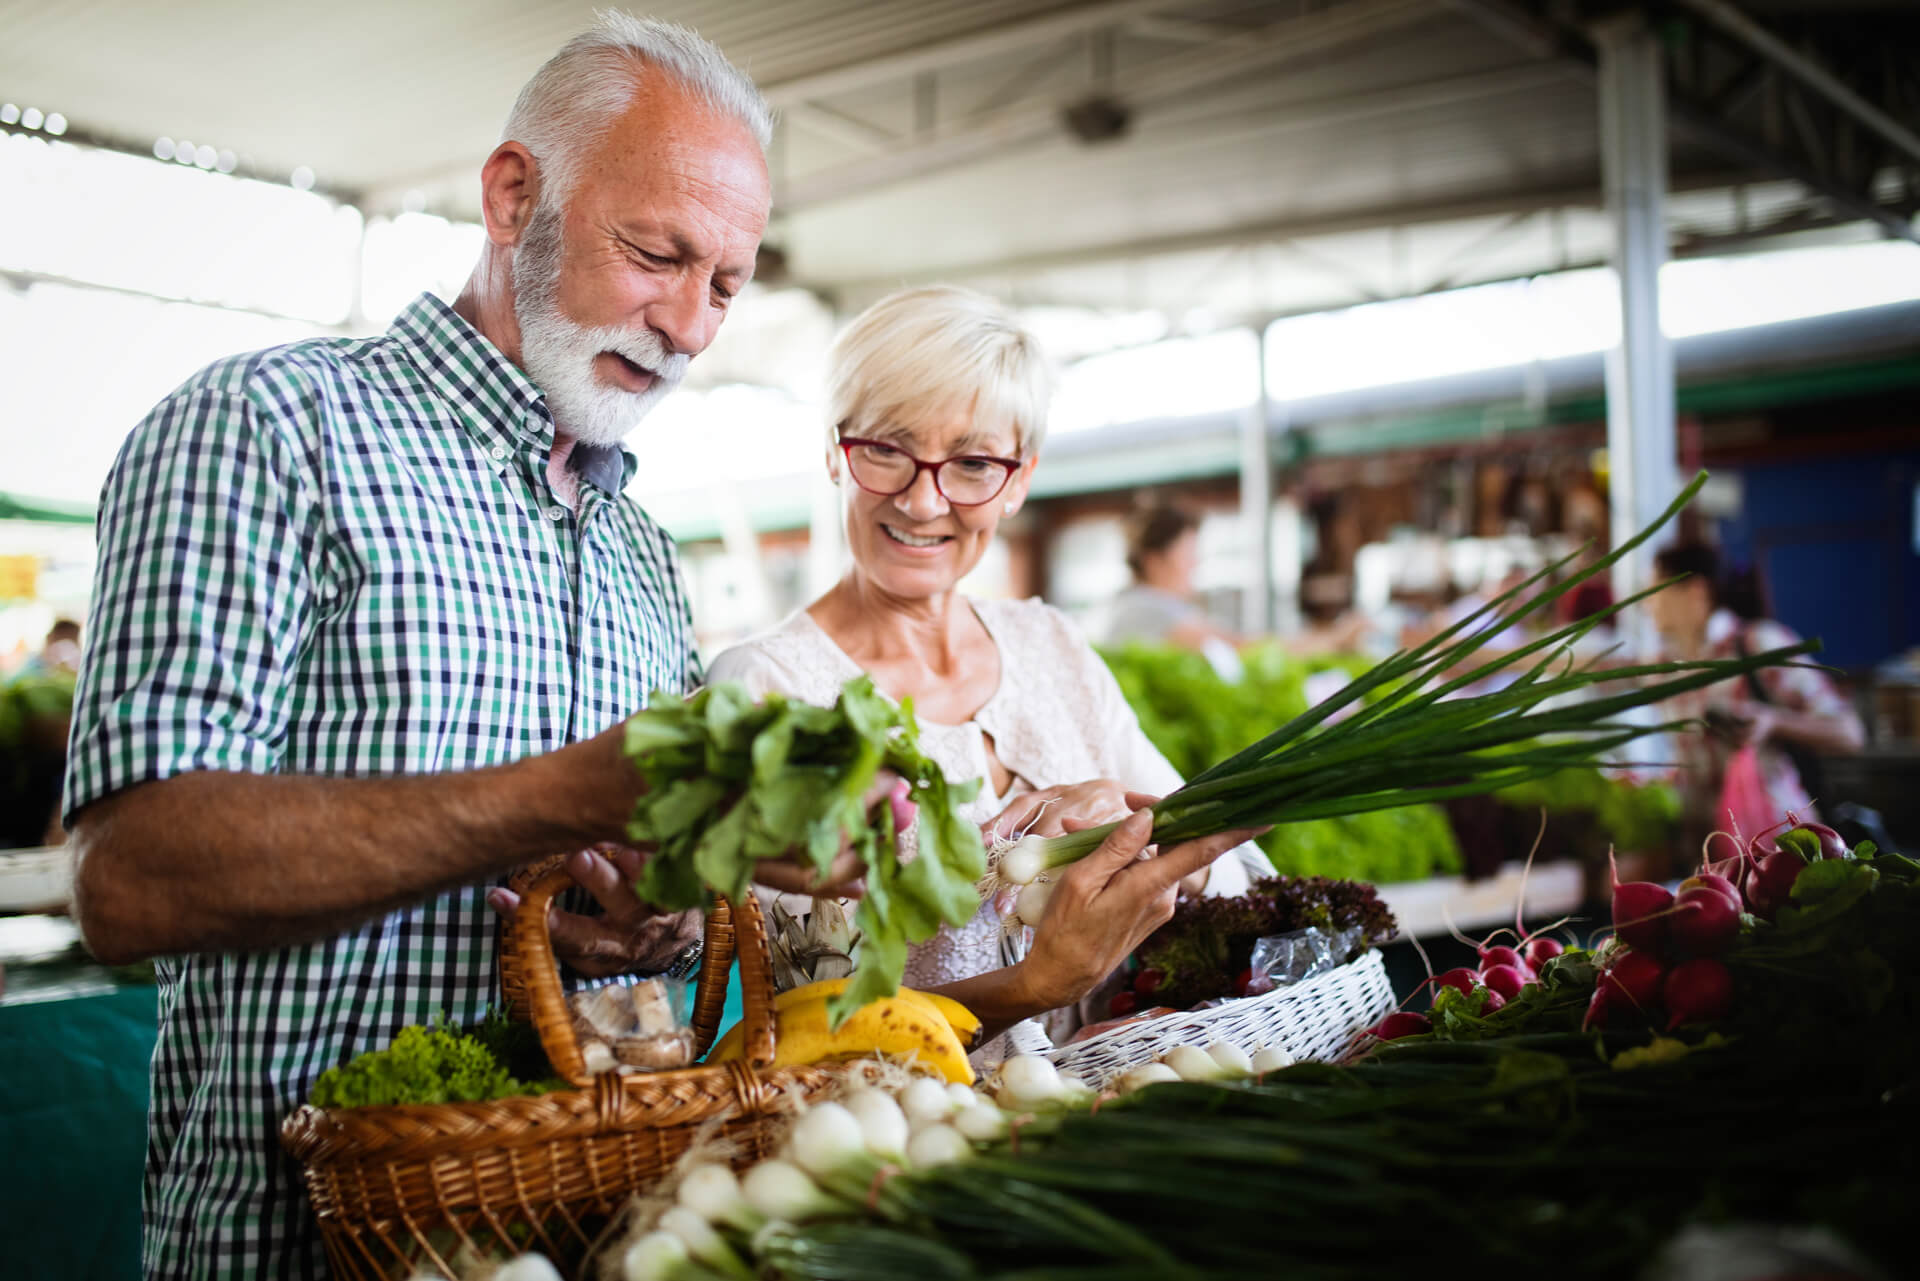 History of Farmers Markets: When and Why They Became Popular